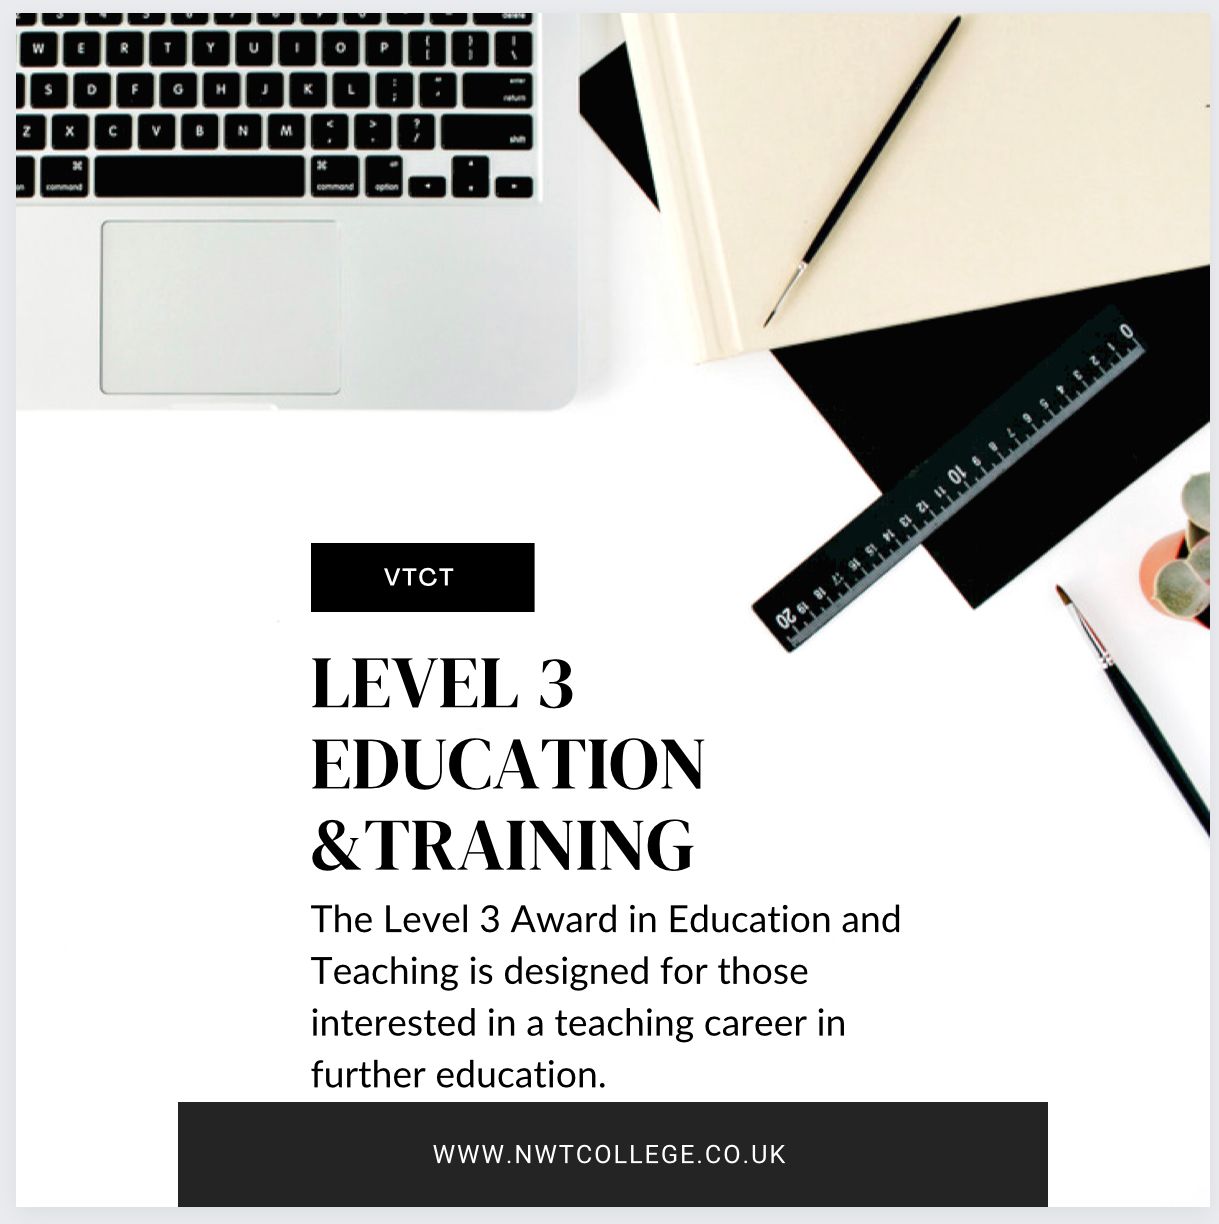 VTCT Level 3 Award in Education and Training